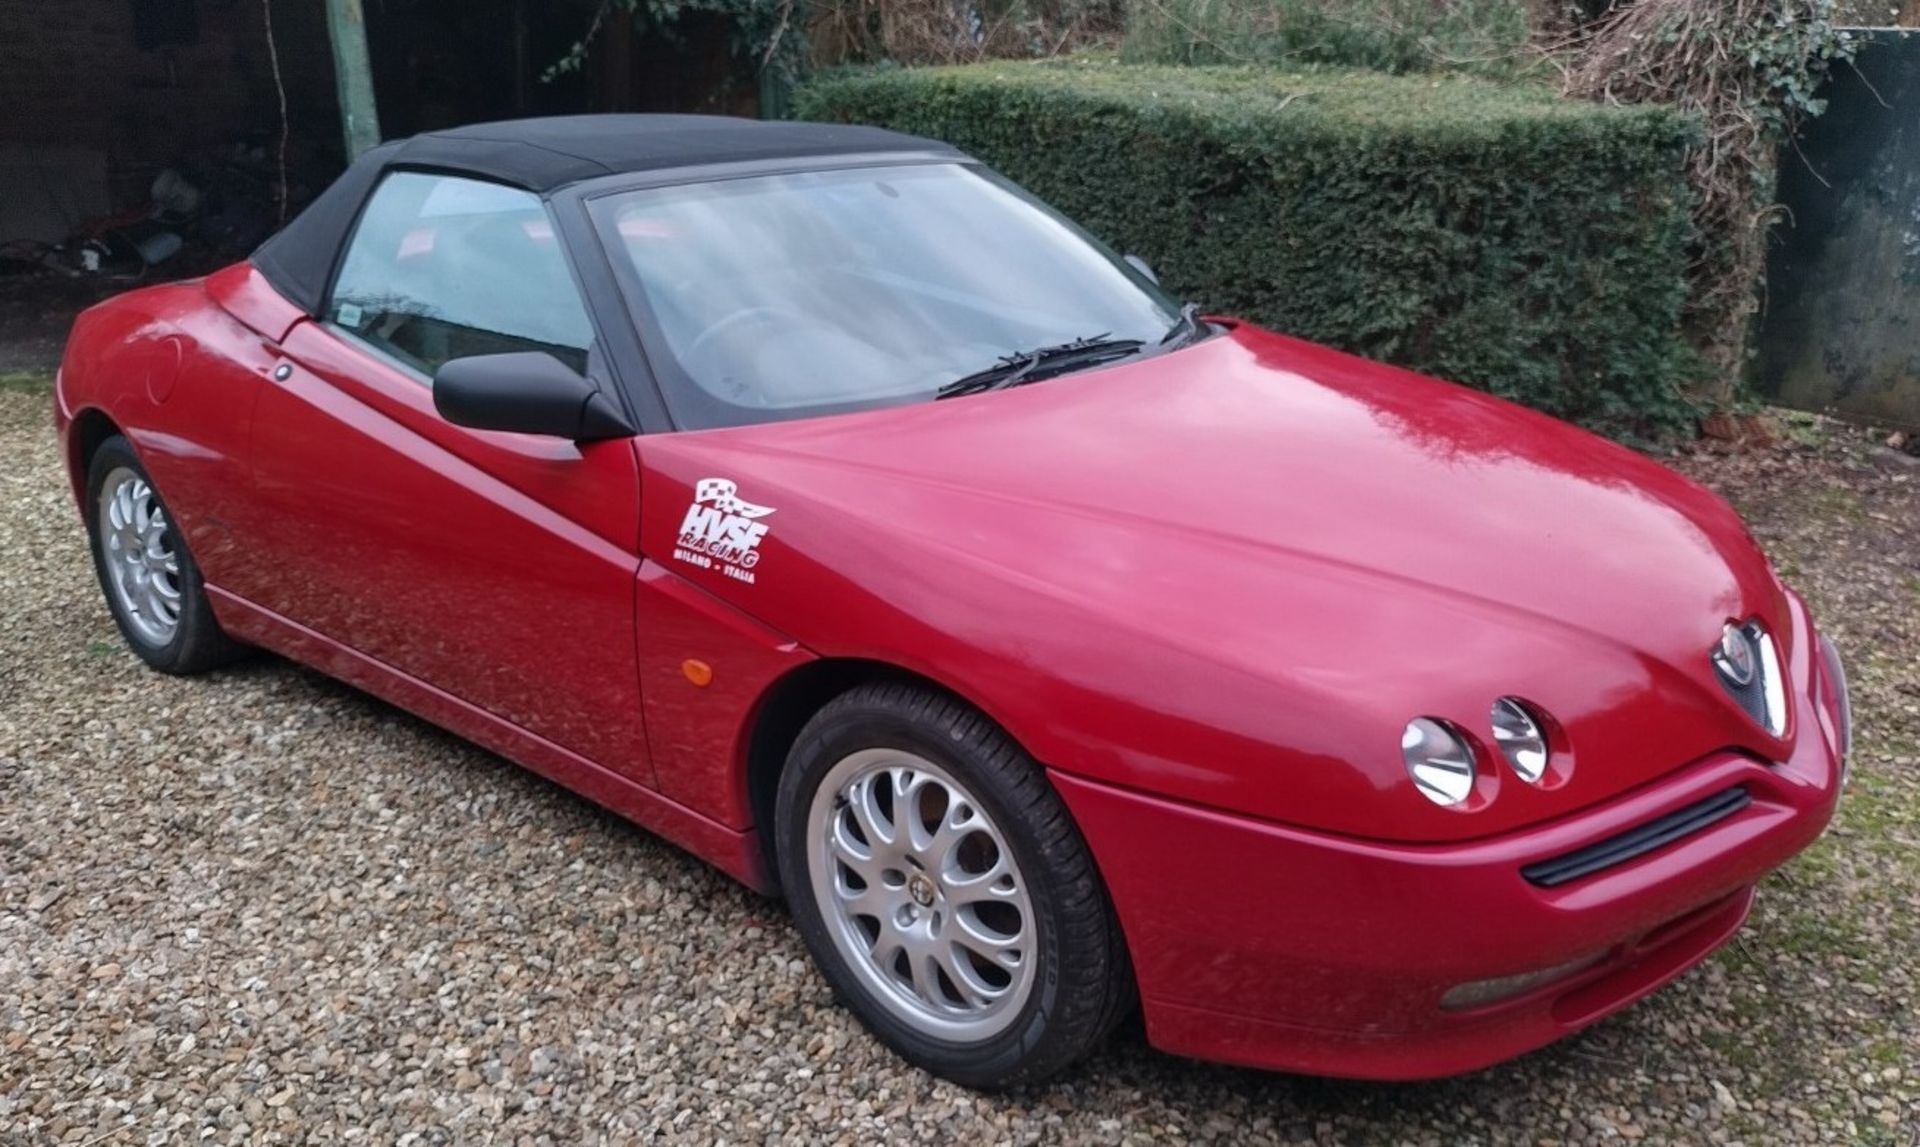 2000 Alfa Romeo Spider Lusso TS Spider Registration number W637 TGS Red with a black interior MOT - Image 11 of 14